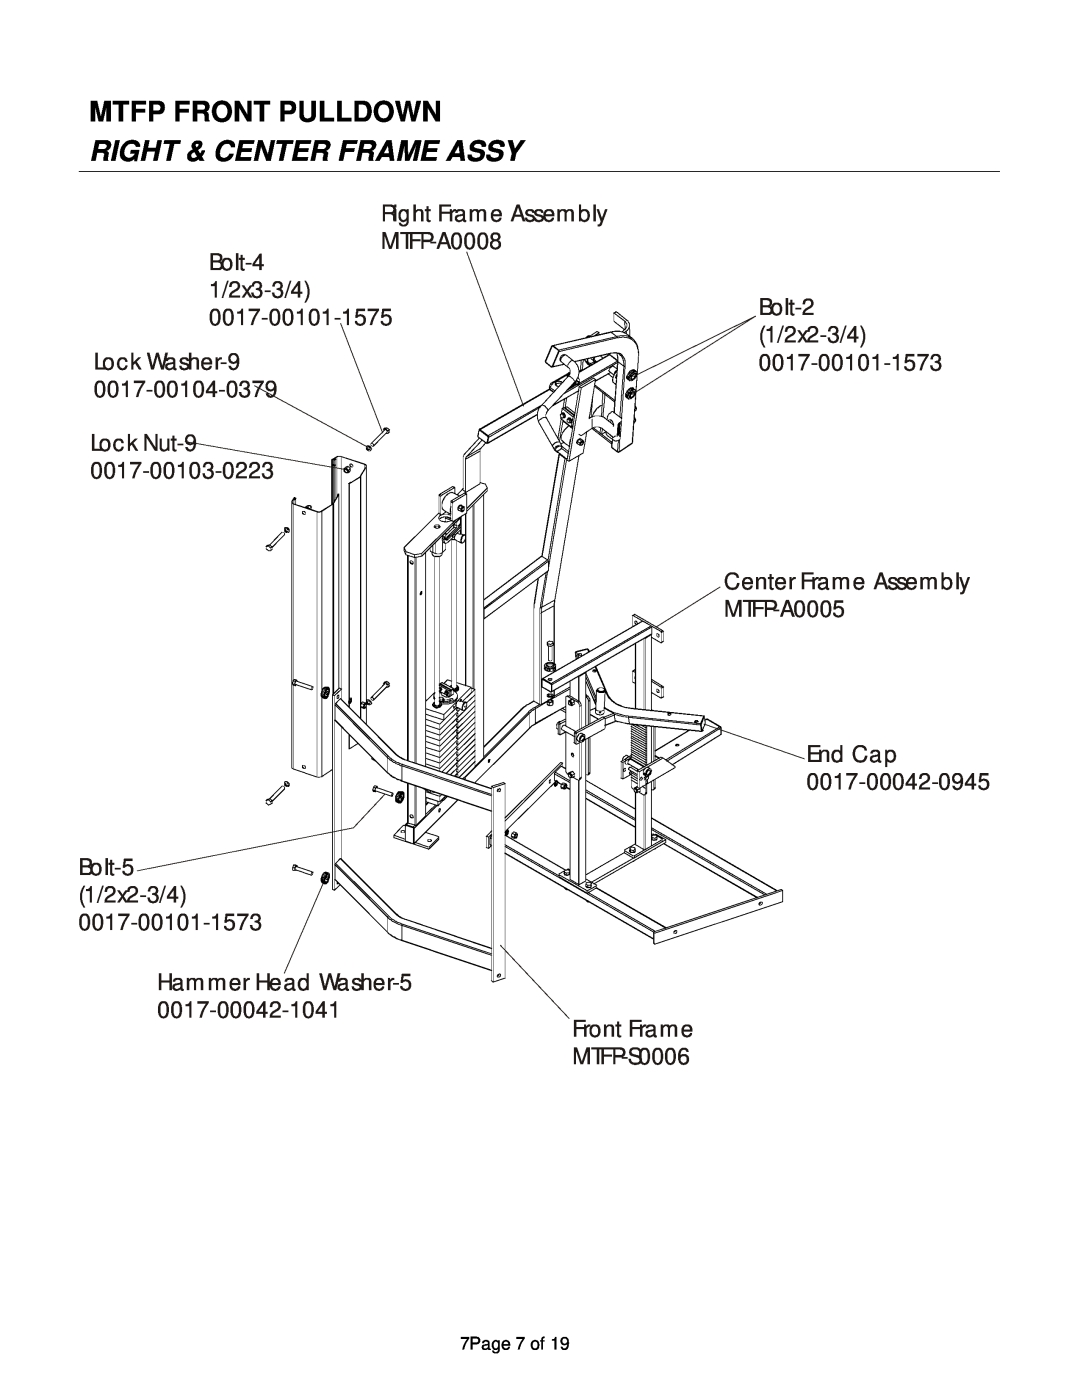 Life Fitness MTFP manual Right & Center Frame Assy, Mtfp Front Pulldown, 7Page 7 of 